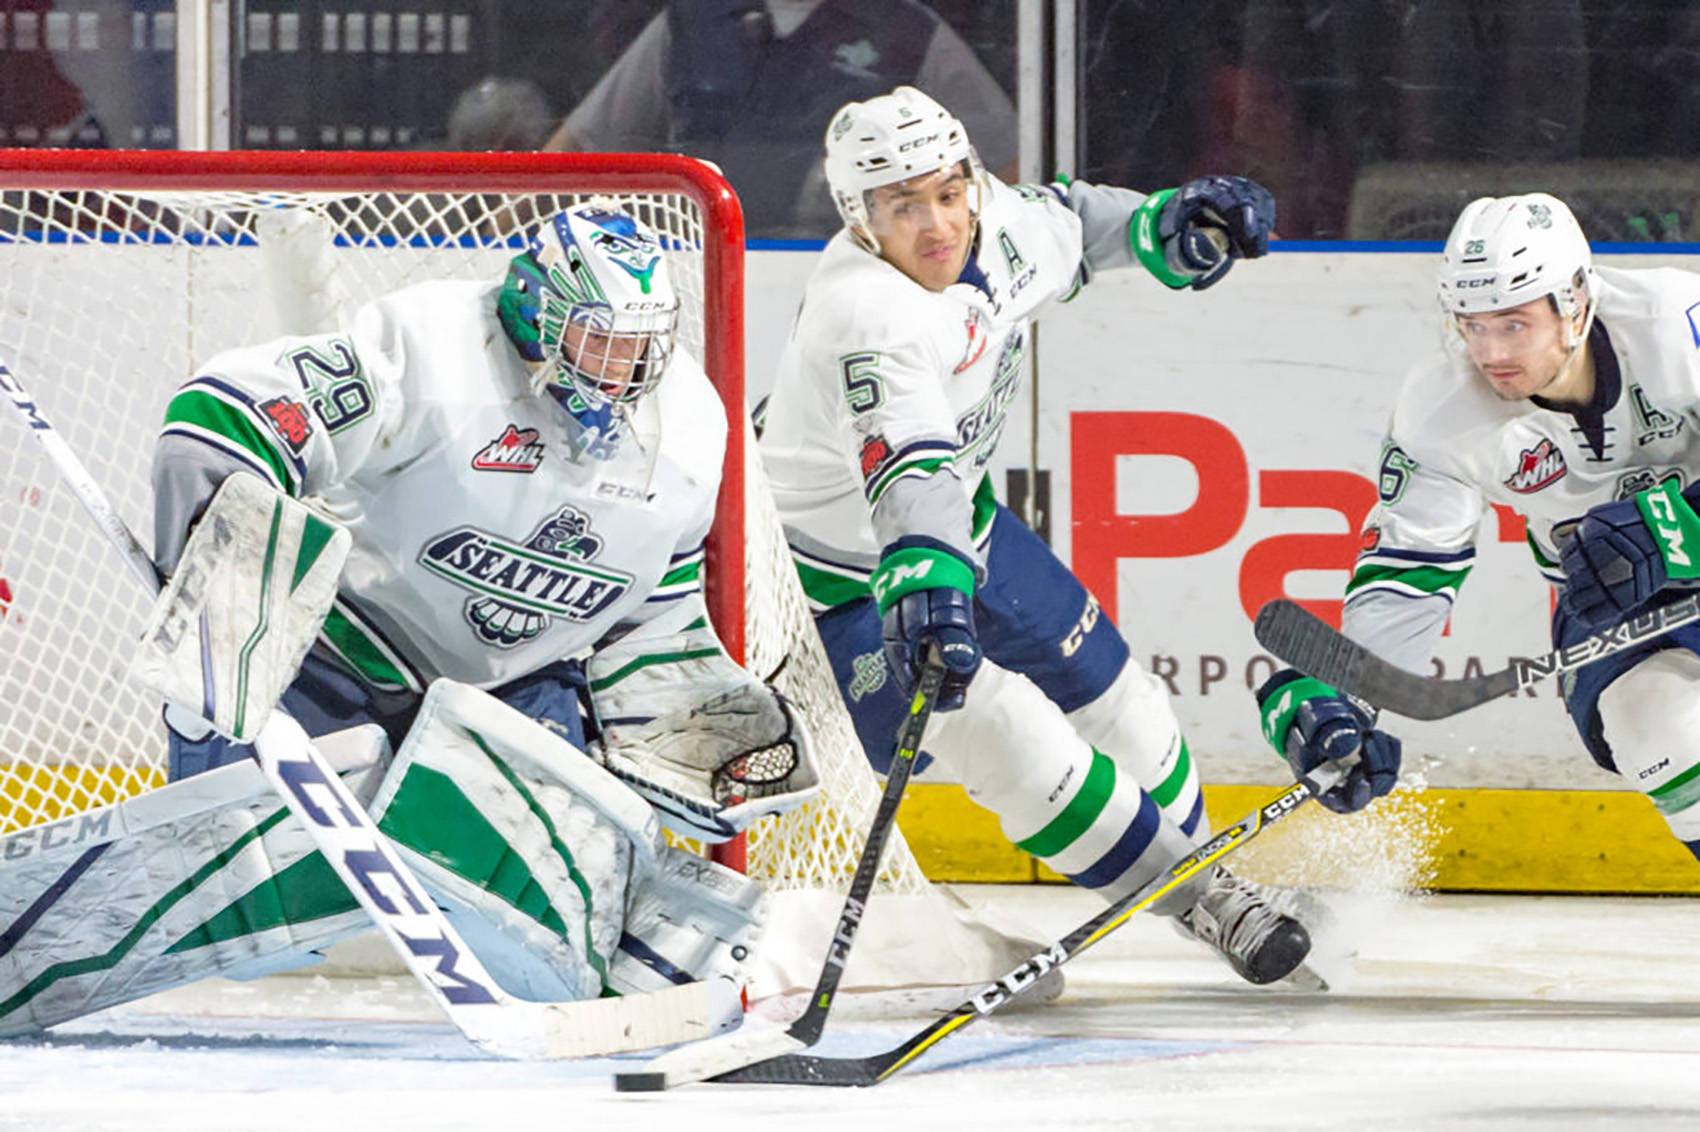 The Thunderbirds’ Jarret Tyszka, middle, and Nolan Volcan, right, reach to push the puck away from goalie Matt Berlin during WHL play against Spokane on Friday night. COURTESY PHOTO, Brian Liesse, T-Birds